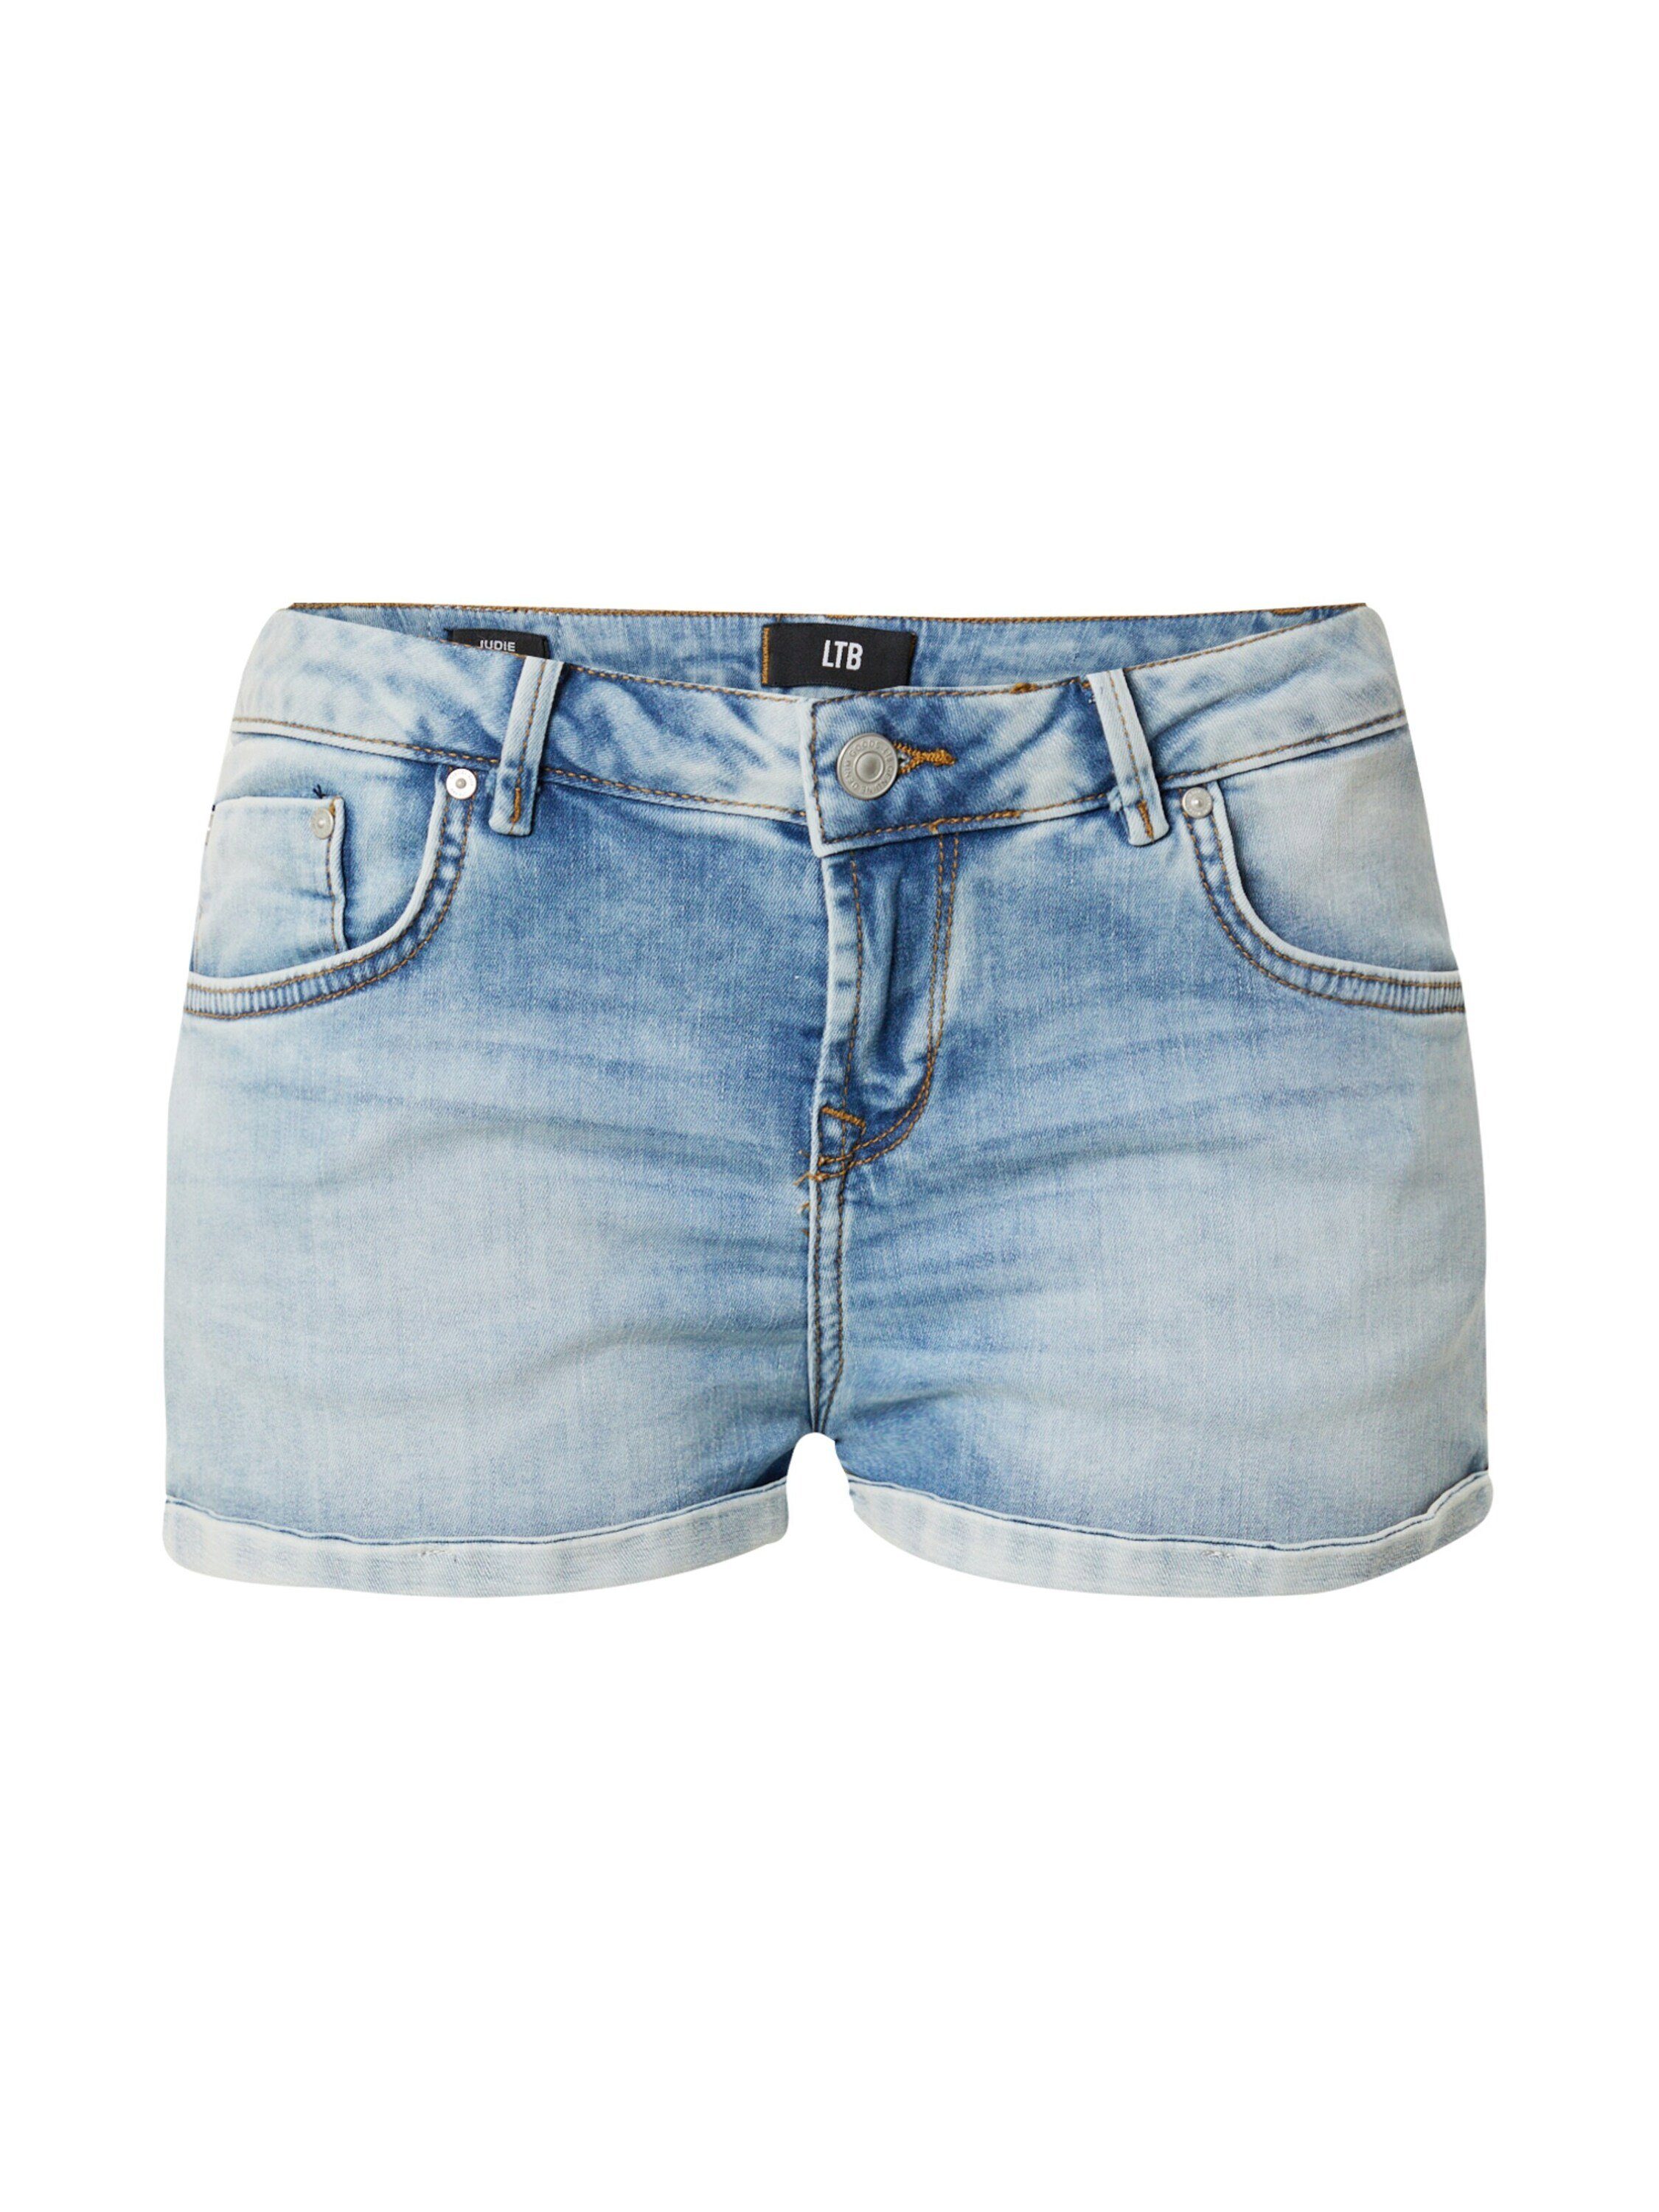 LTB Patches, Weiteres Judie Jeansshorts Detail (1-tlg)